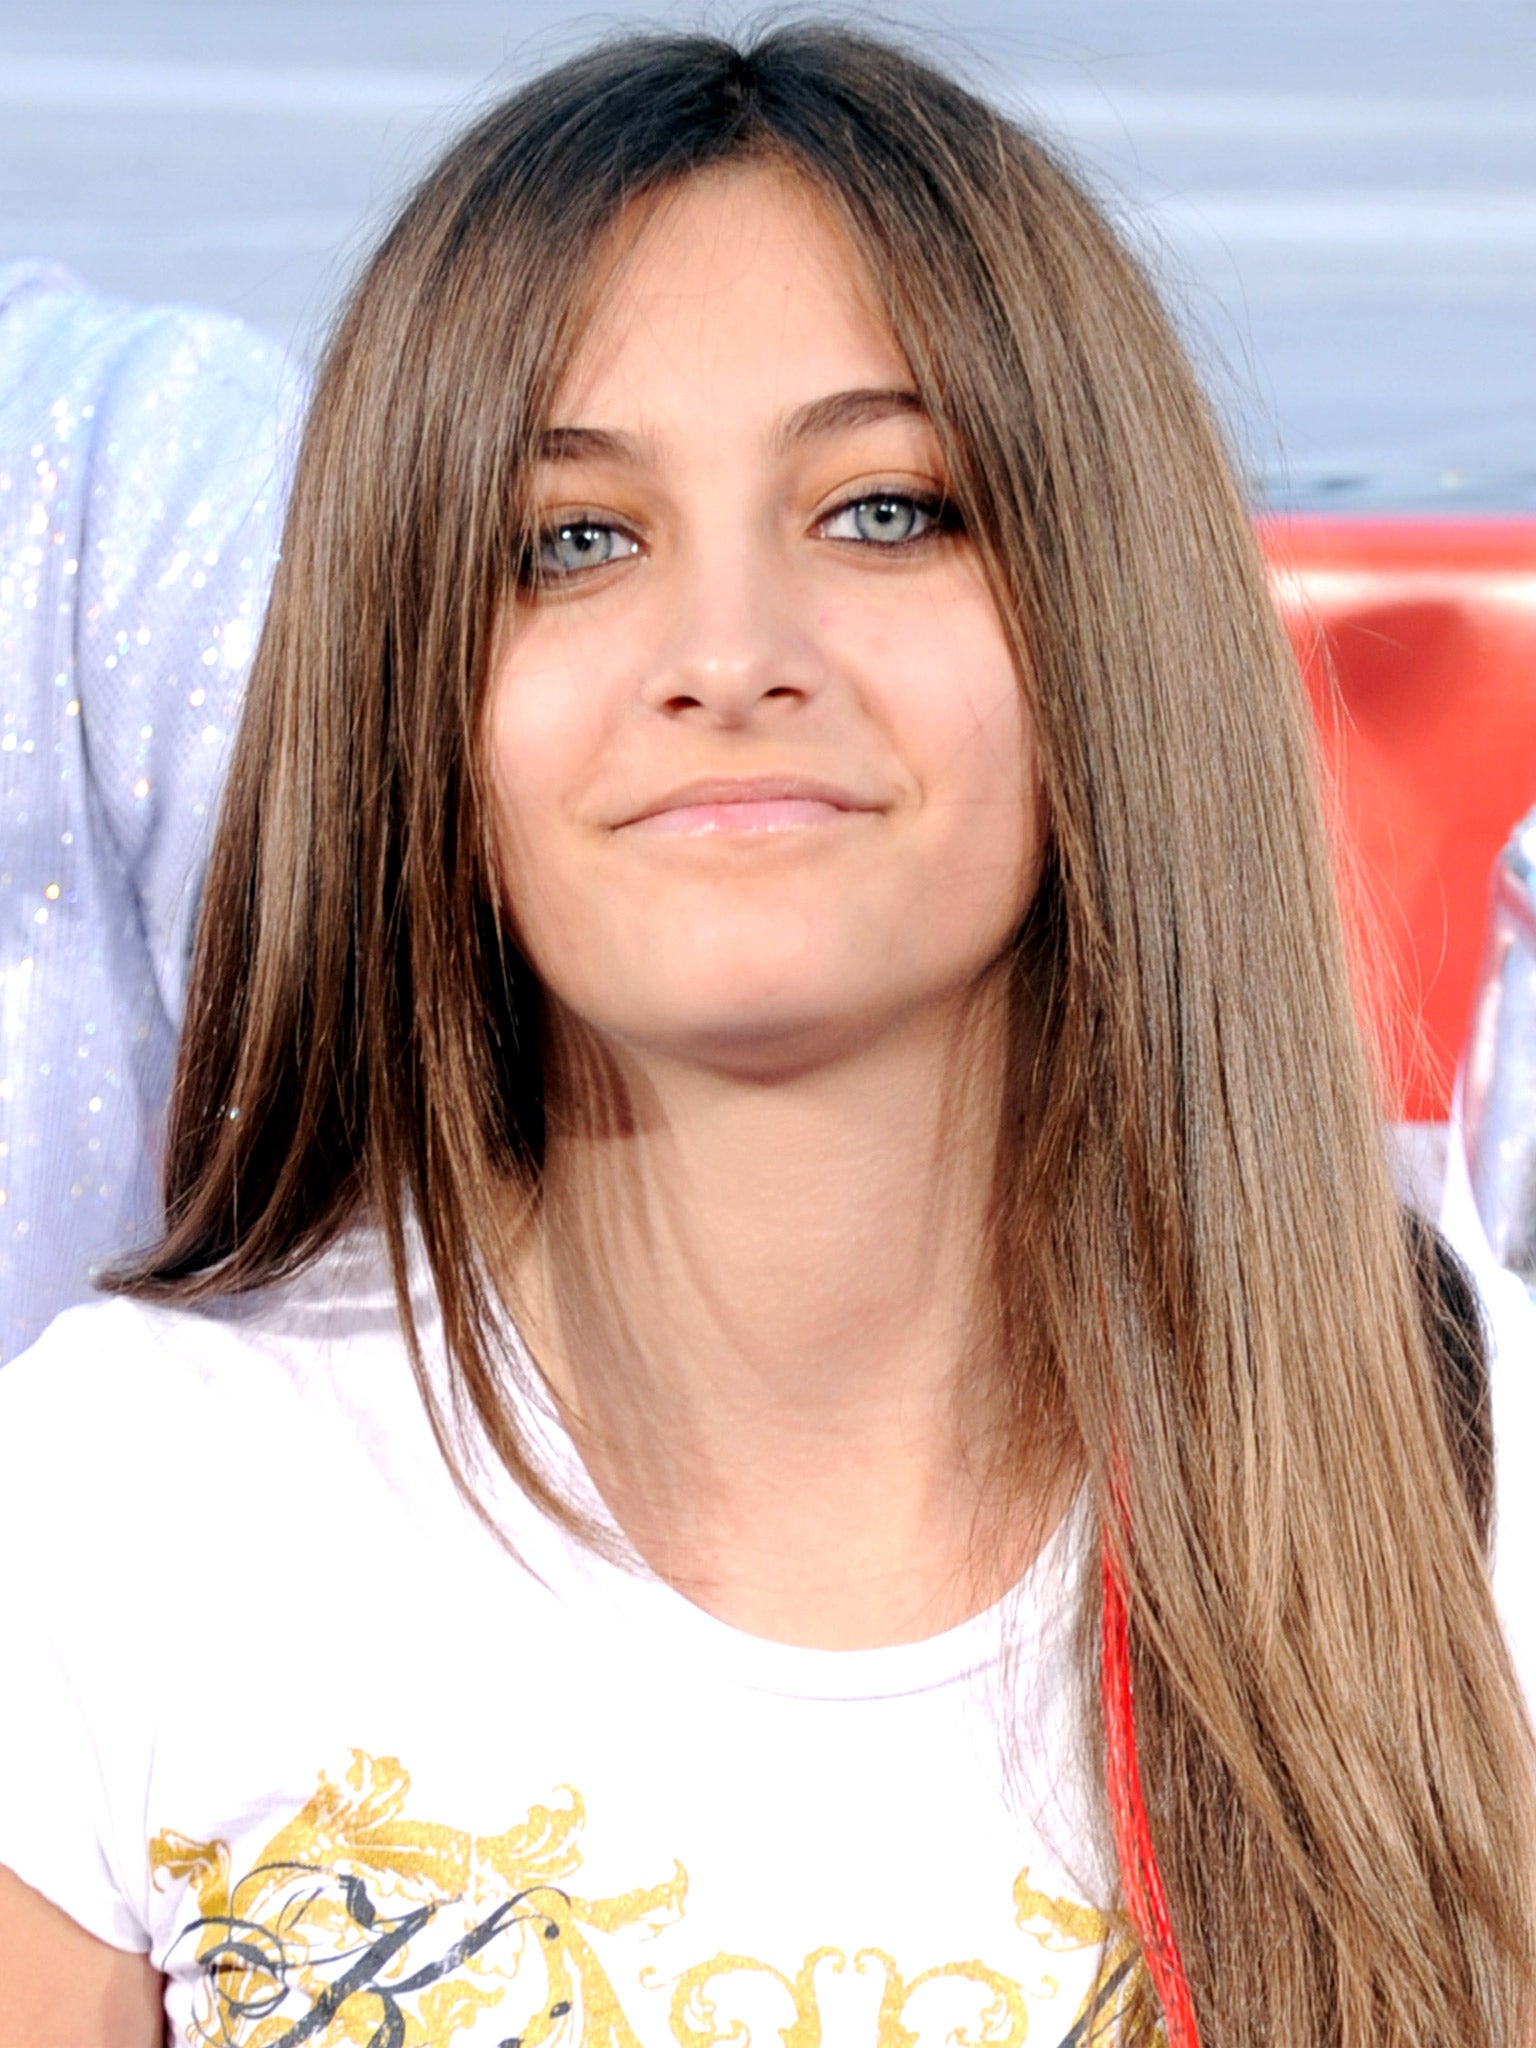 Paris Jackson is expected to make a full recovery